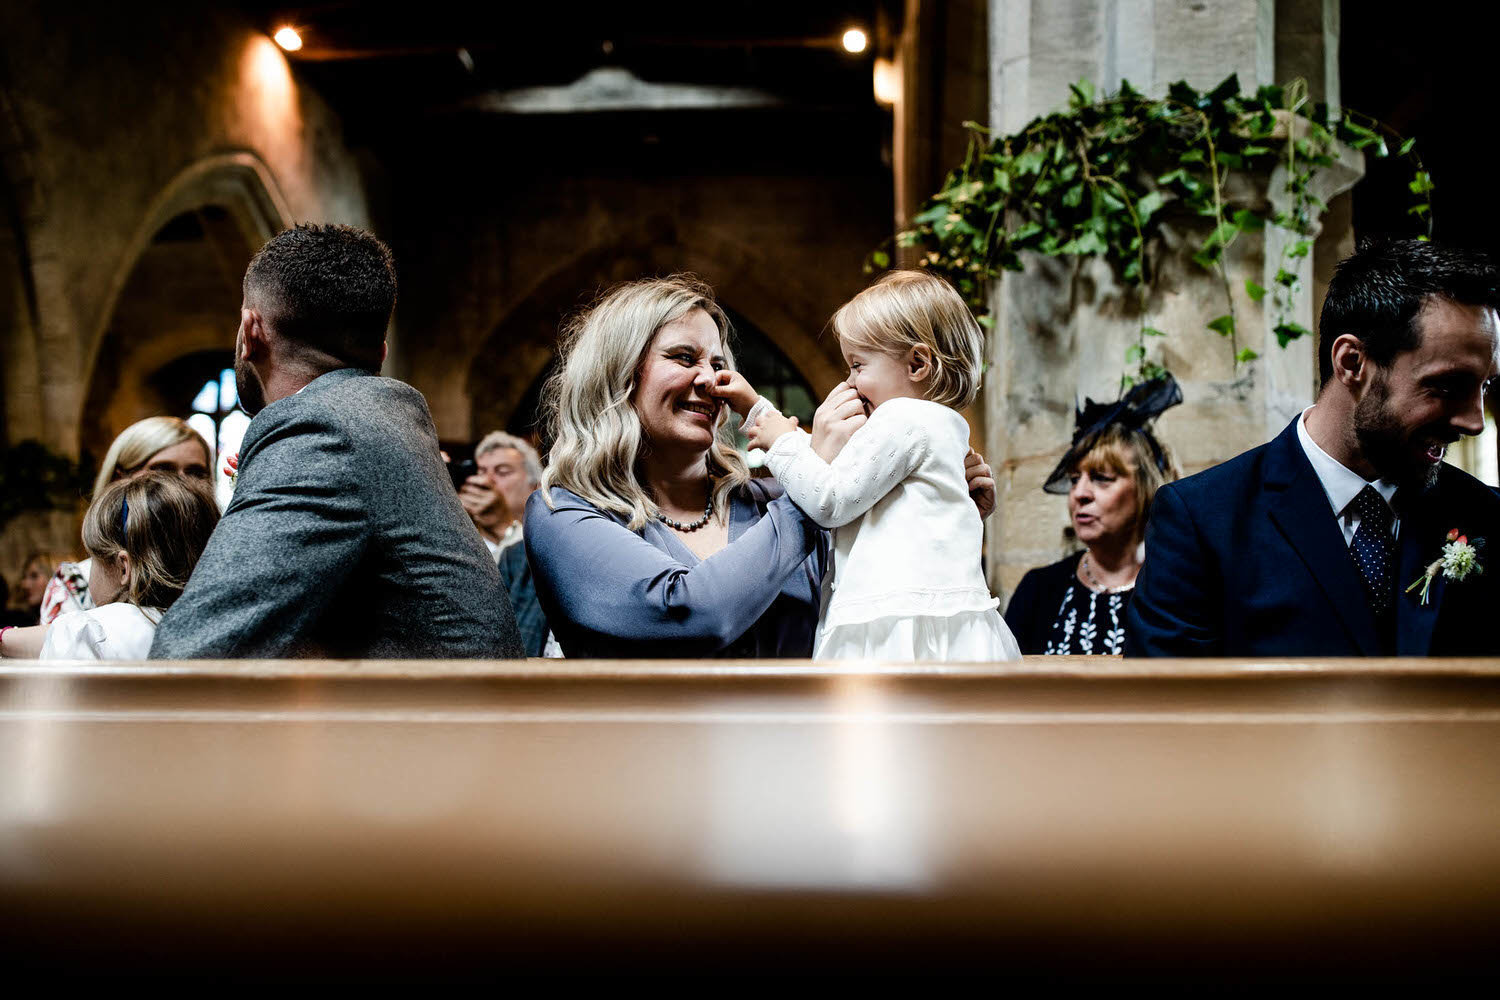 a cute moment of a mother and her daughter at a church wedding, documenatry wedding photograph